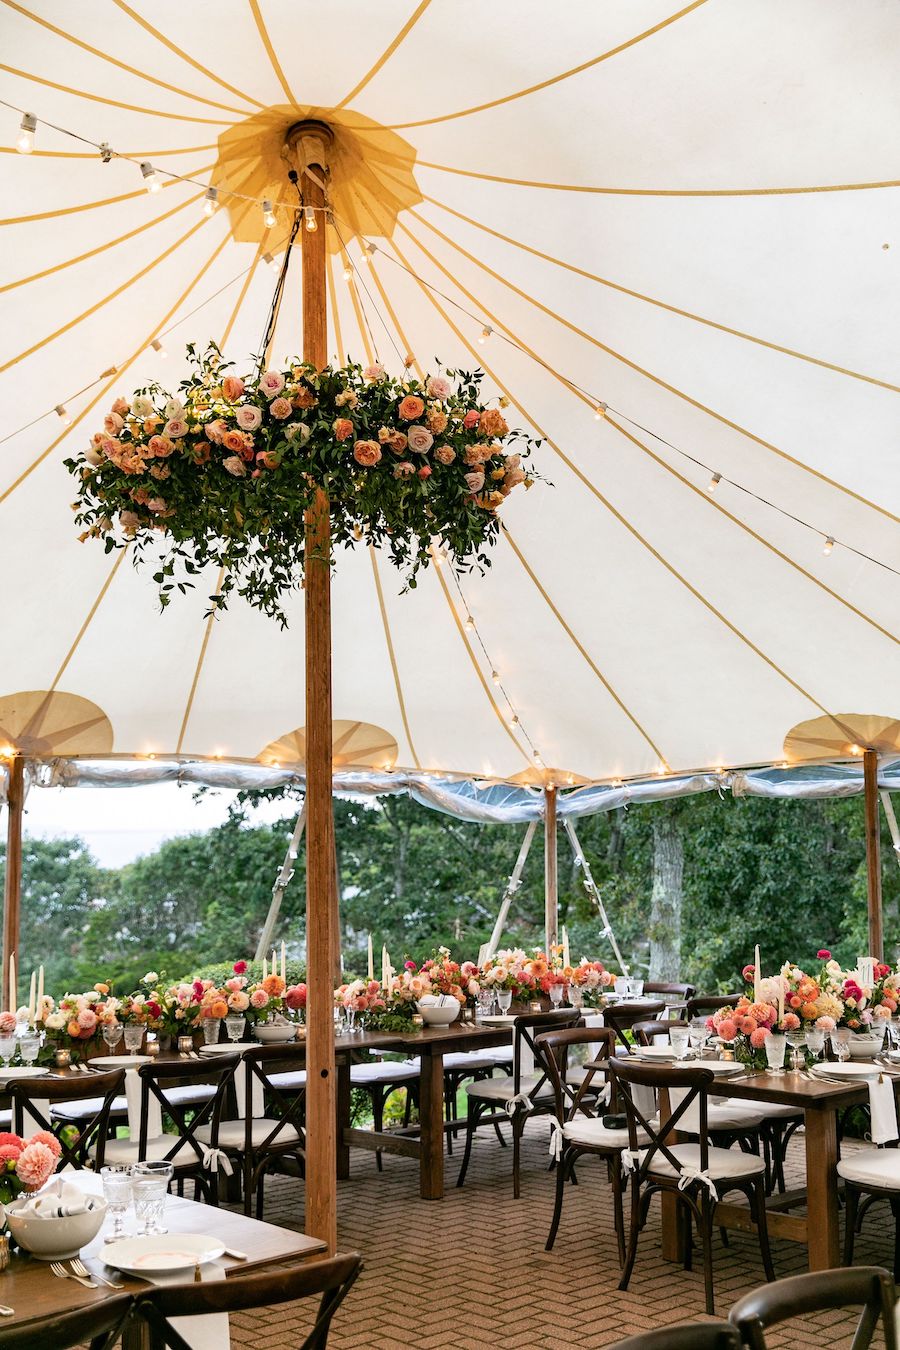 Reception Décor Inspiration for Every Type of Wedding Venue